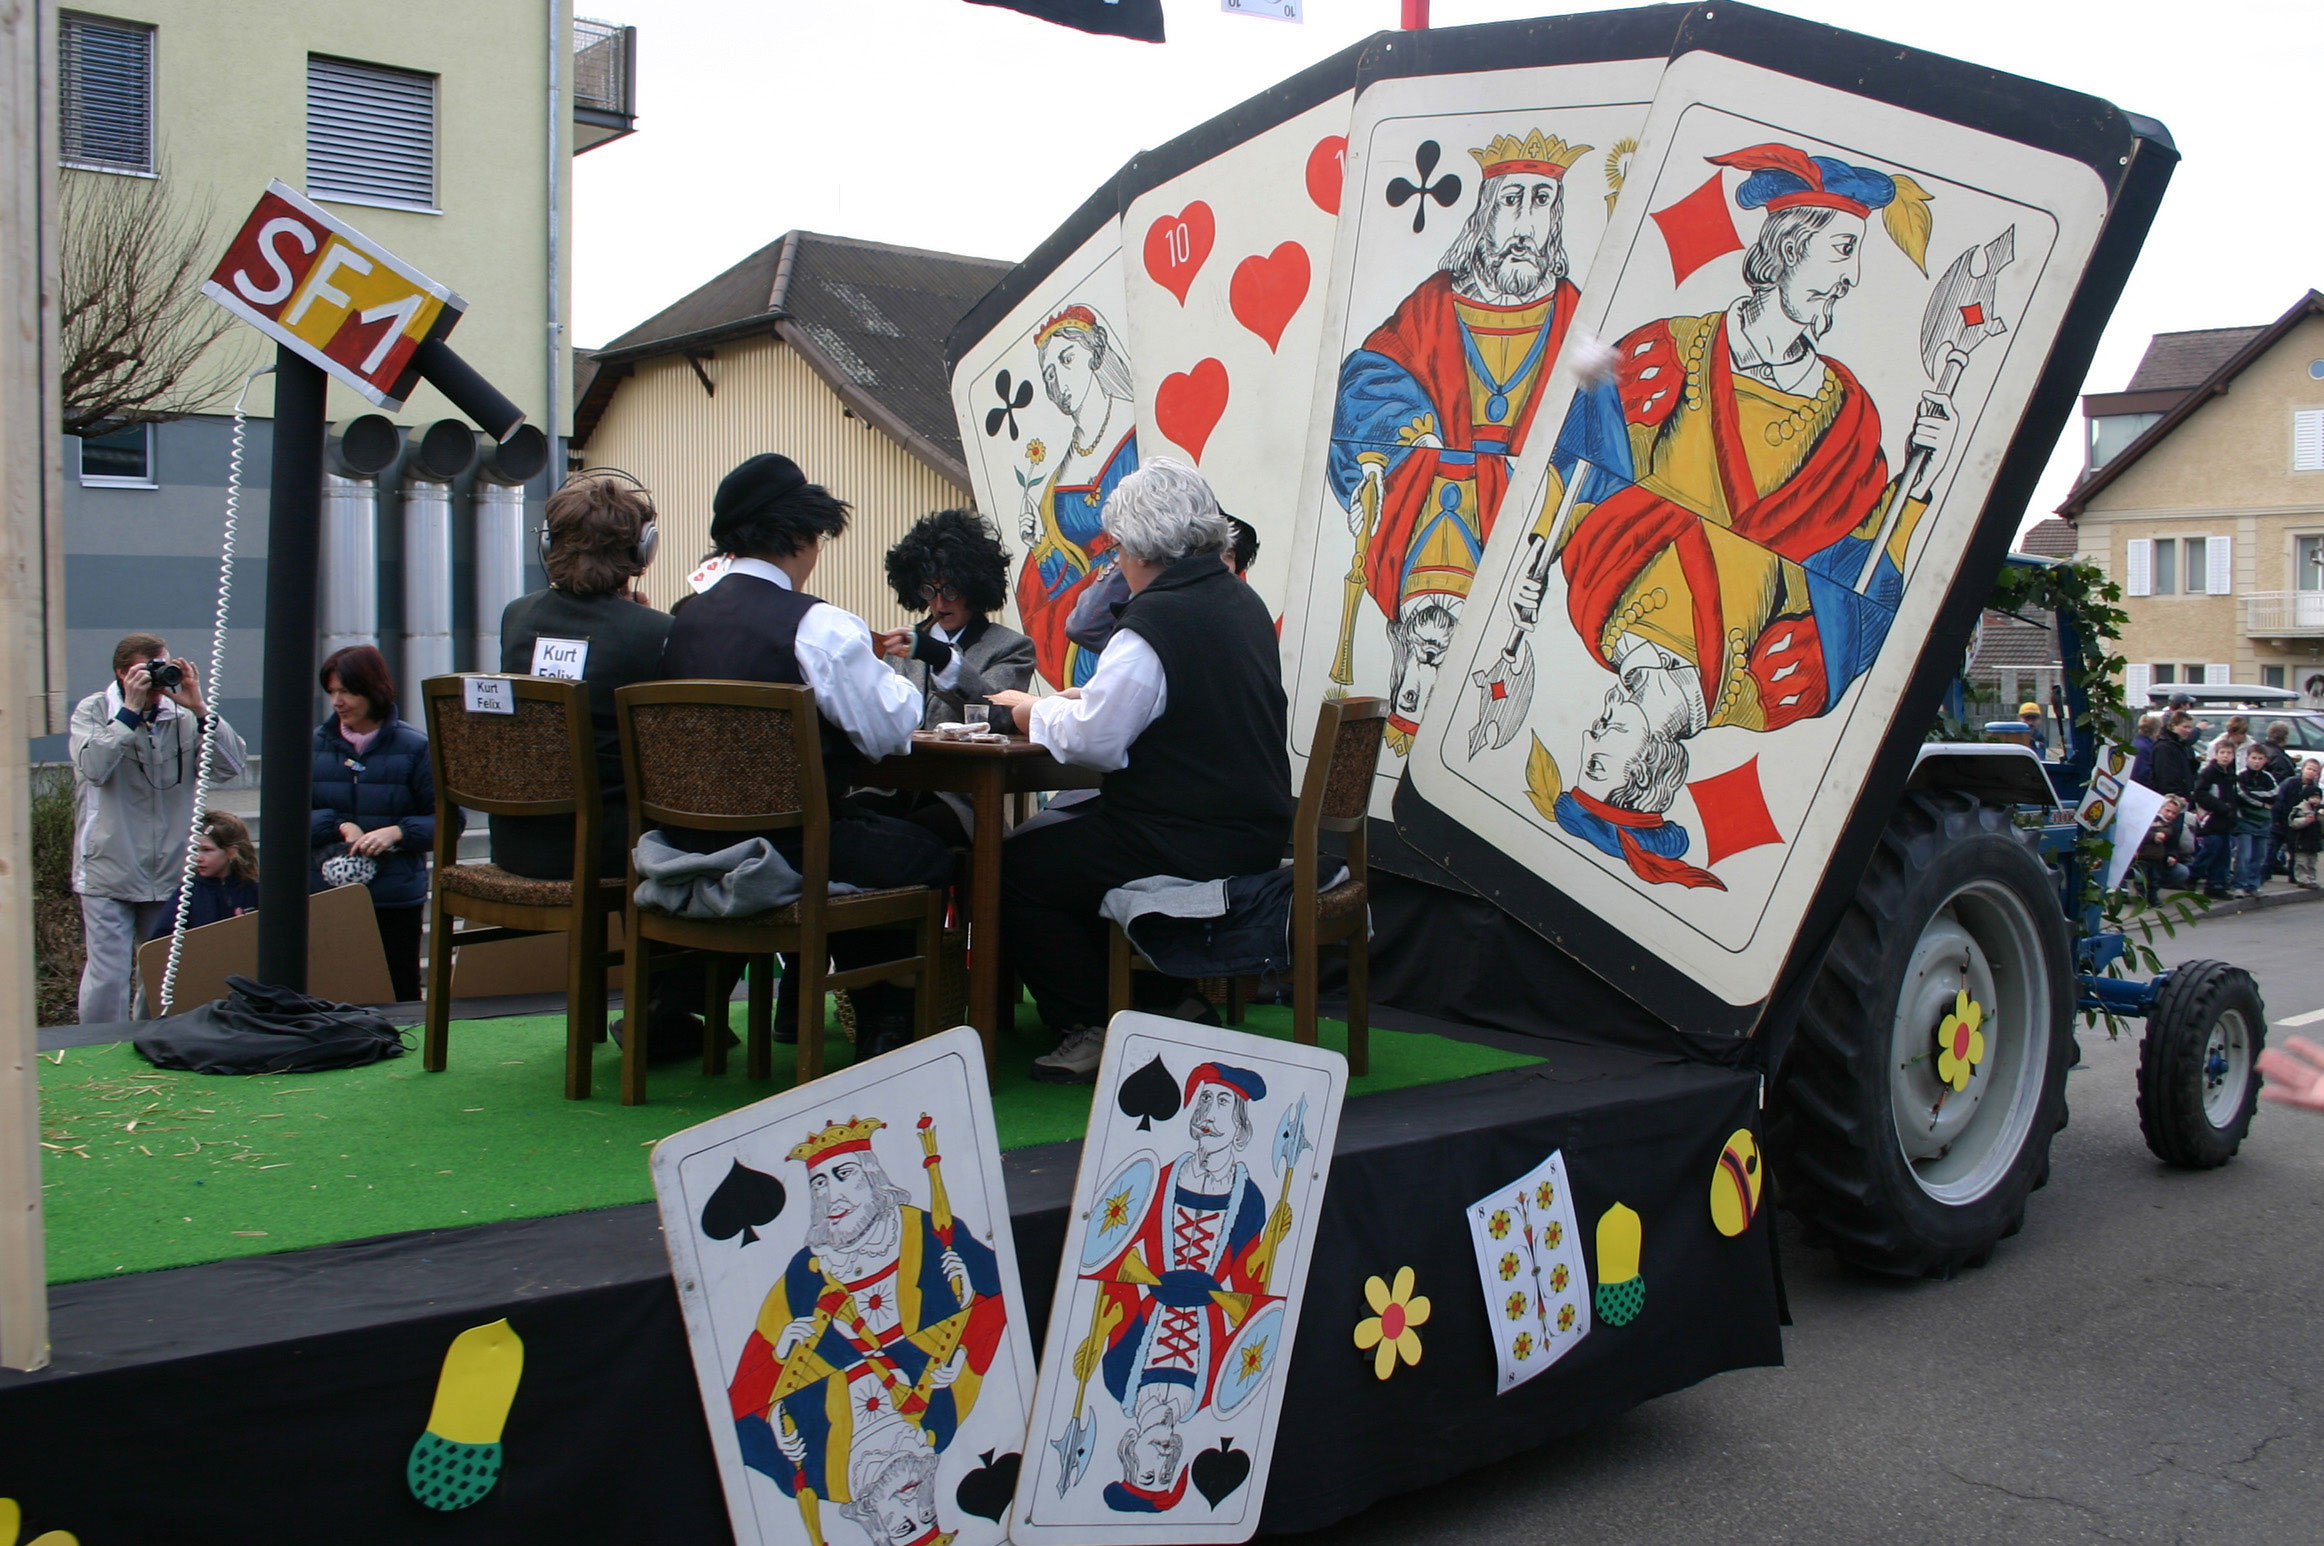 A procession float themed around the traditional card game Jassen, 2005 © Priska Lauper, 2005